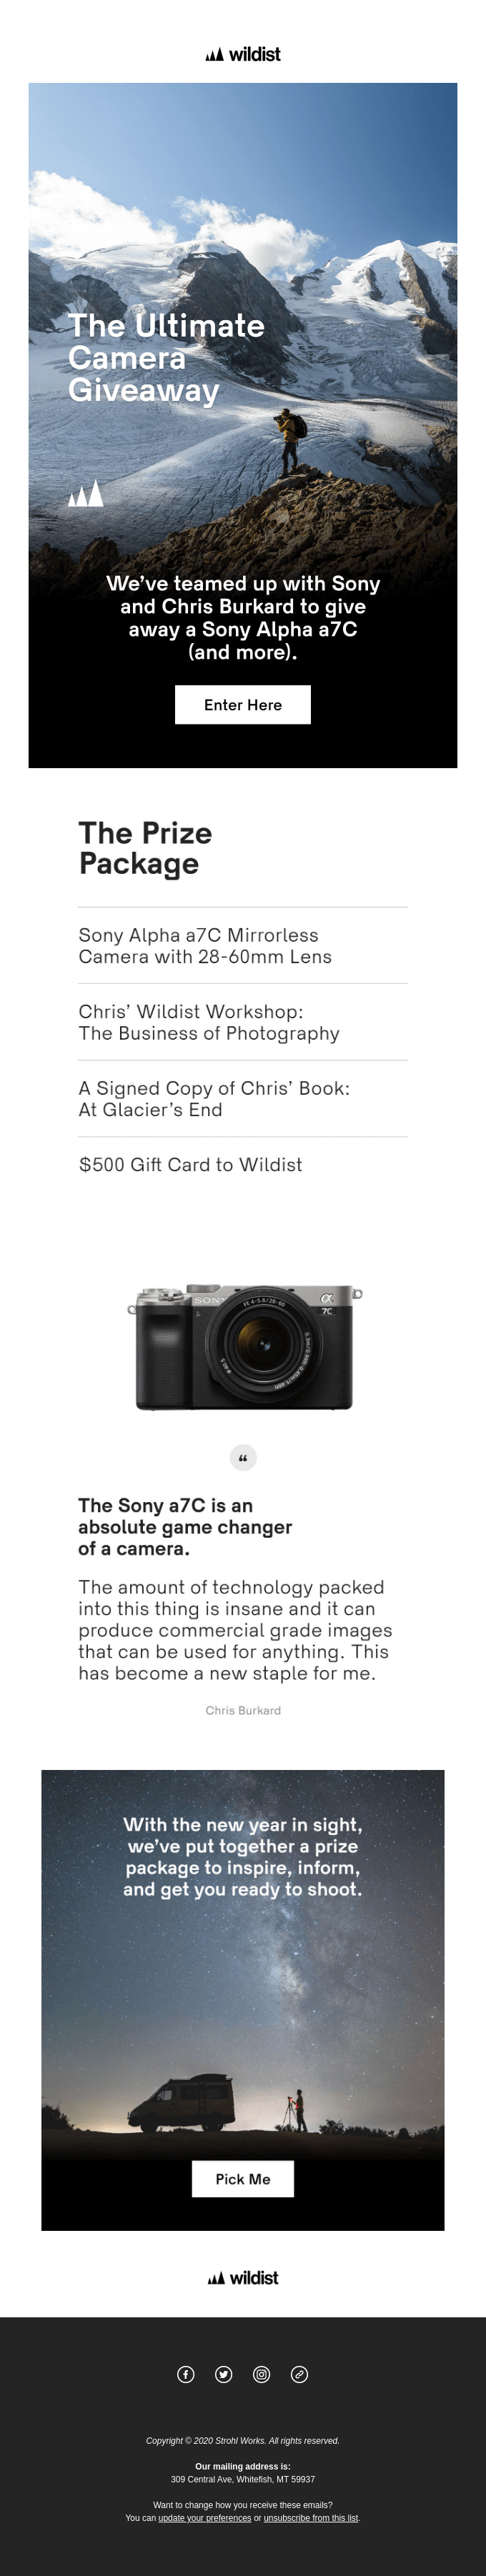 We’re giving away a Sony camera...